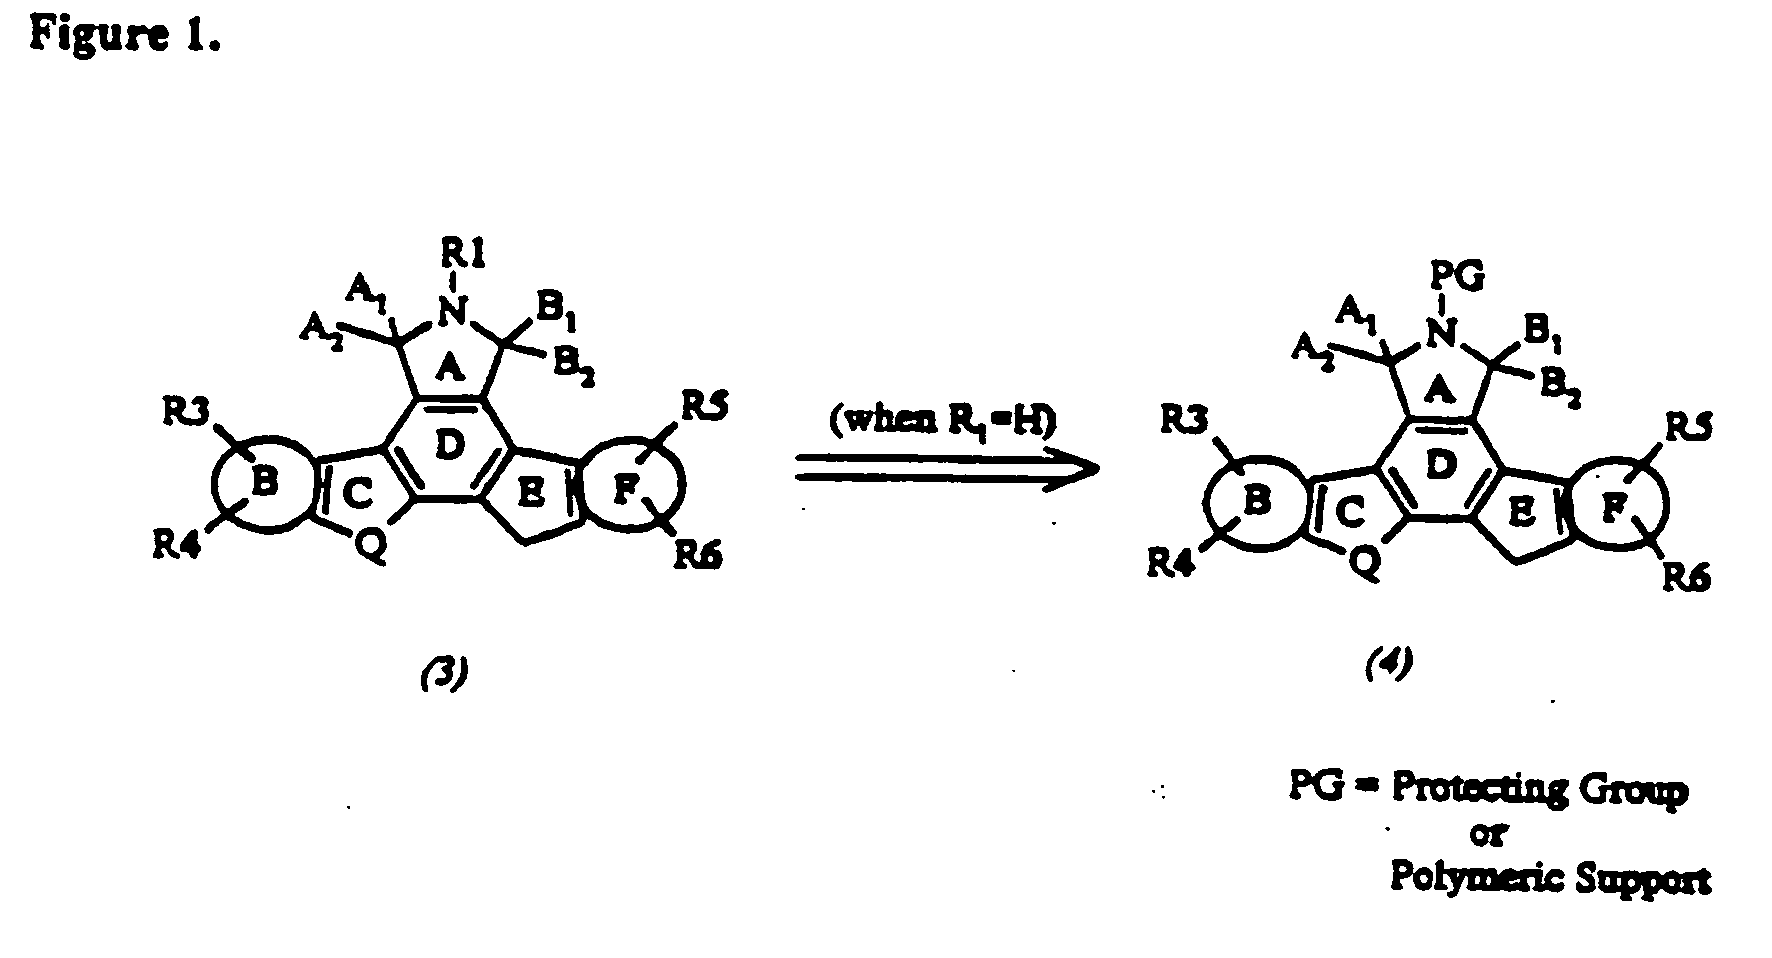 Cyclic substituted fused pyrrolocarbazoles and isoindolones